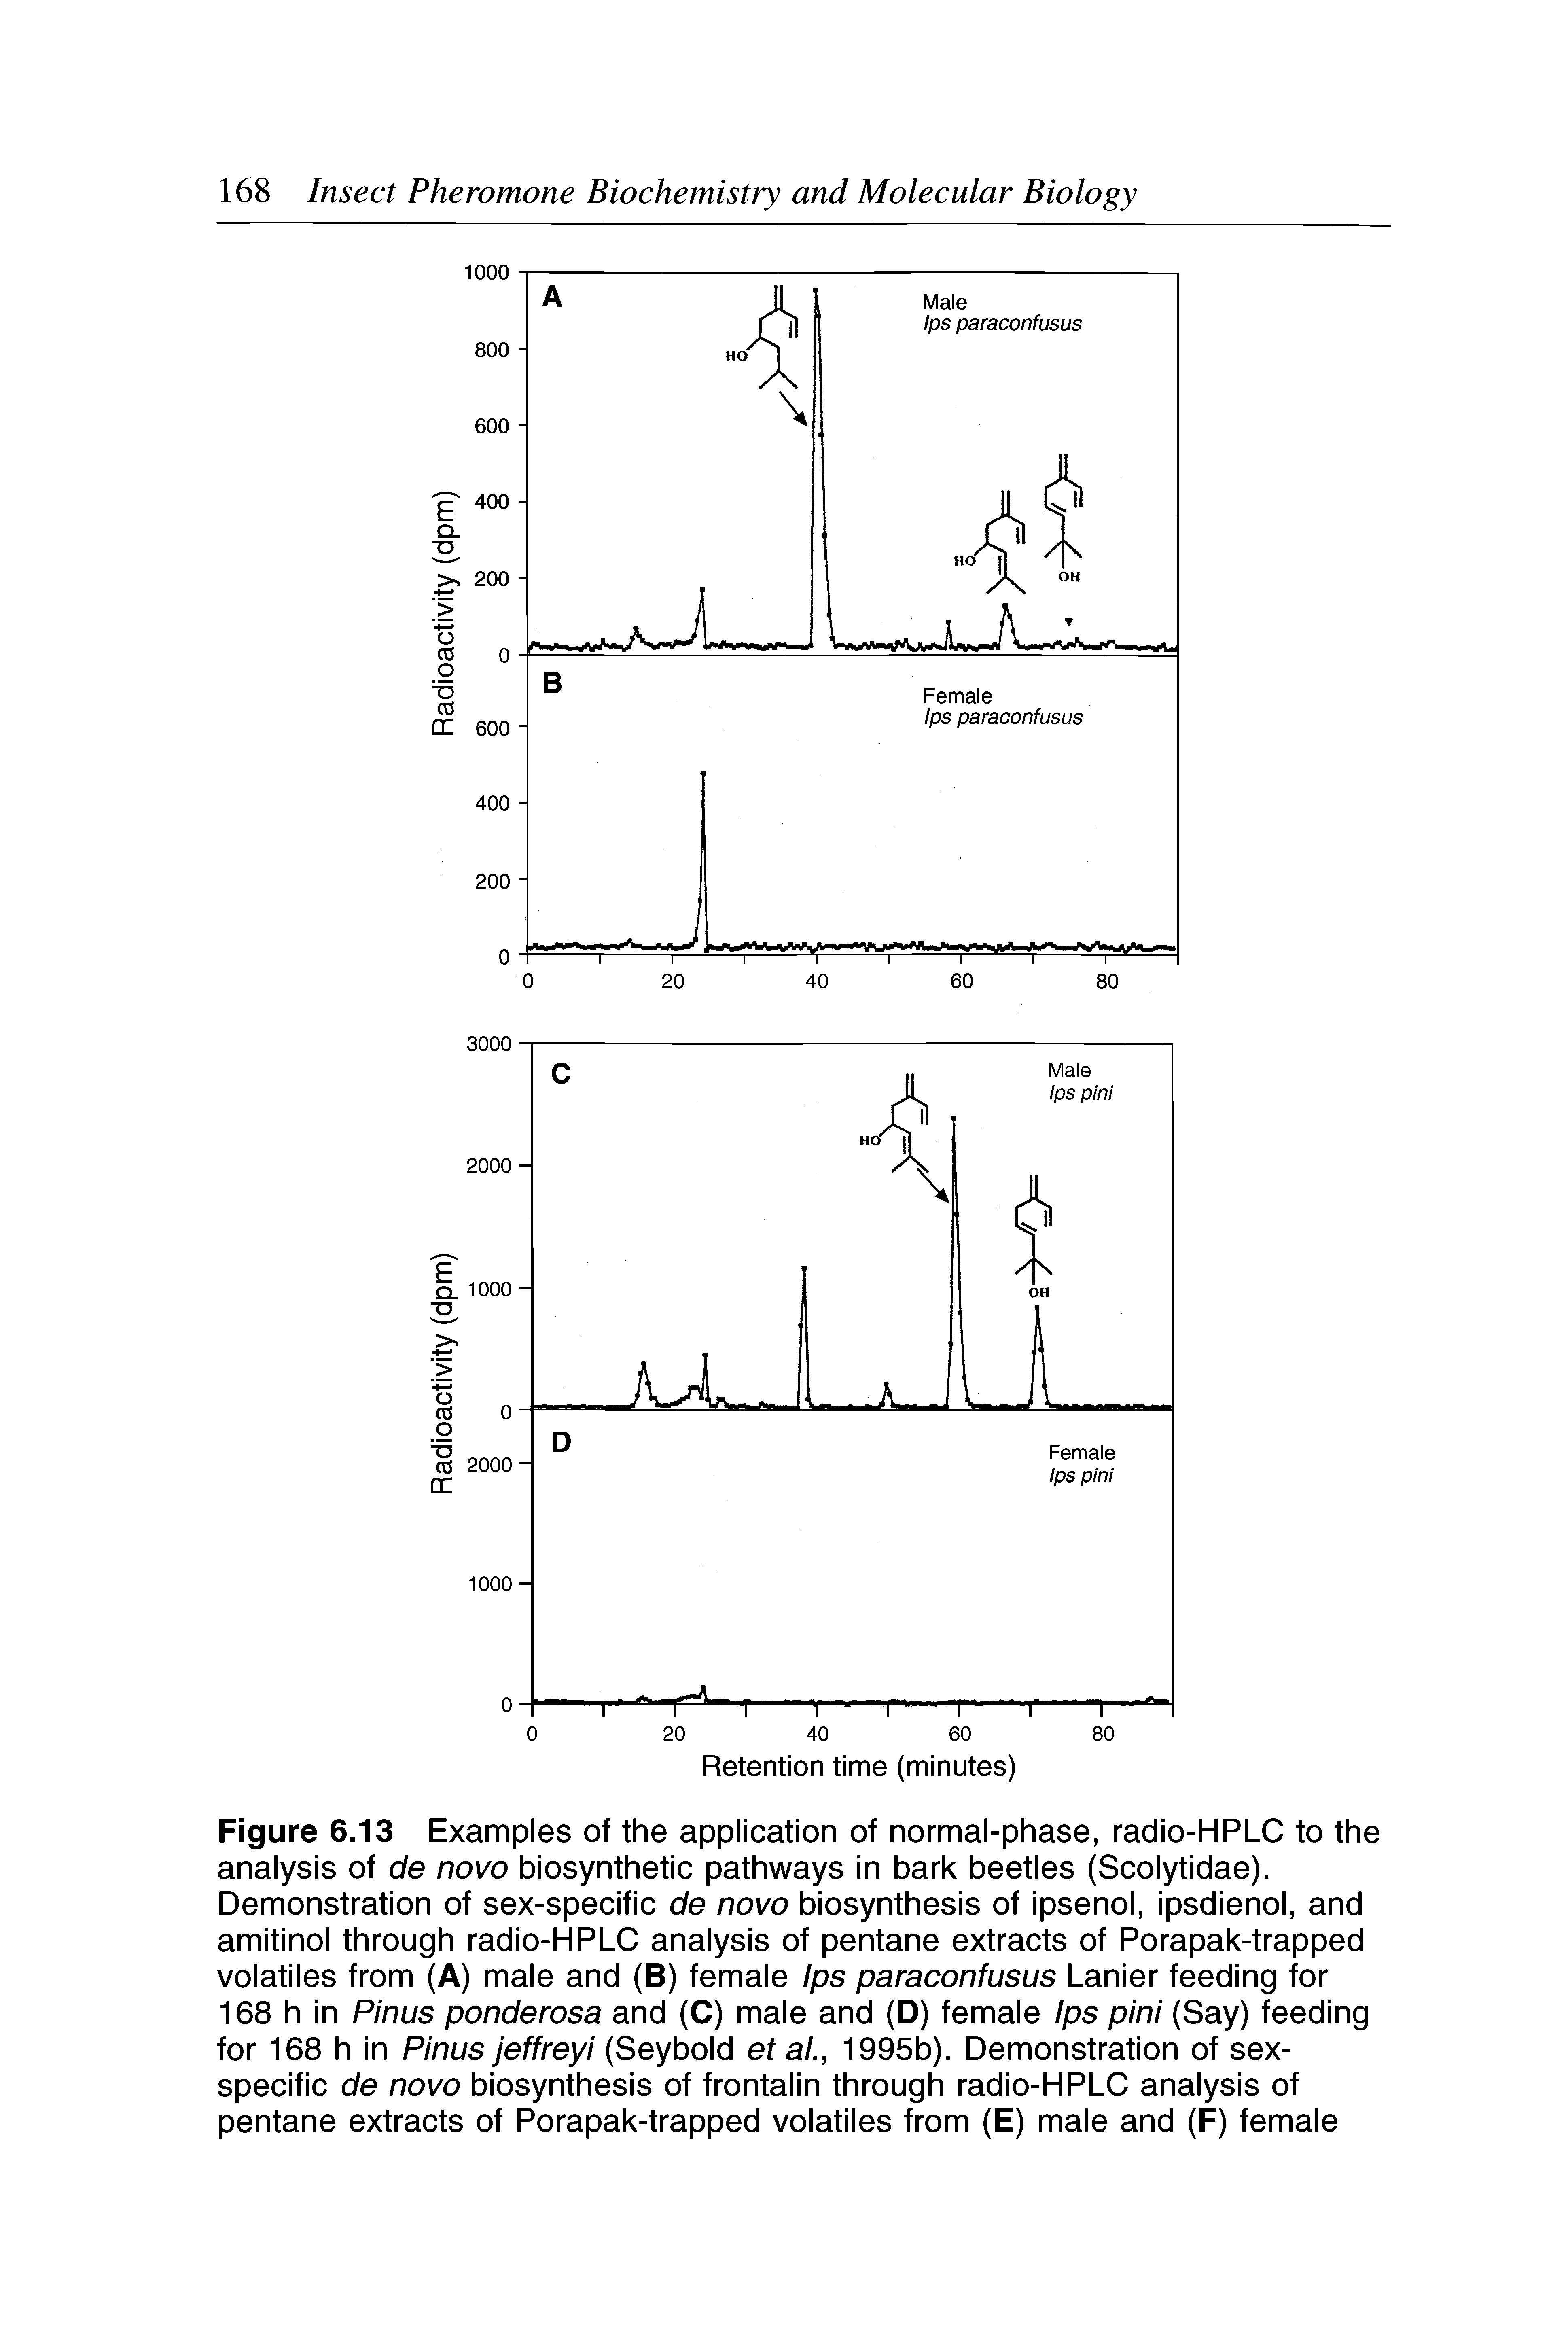 Figure 6.13 Examples of the application of normal-phase, radio-HPLC to the analysis of de novo biosynthetic pathways in bark beetles (Scolytidae). Demonstration of sex-specific de novo biosynthesis of ipsenol, ipsdienol, and amitinol through radio-HPLC analysis of pentane extracts of Porapak-trapped volatiles from (A) male and (B) female Ips paraconfusus Lanier feeding for 168 h in Pinus ponderosa and (C) male and (D) female Ips pini (Say) feeding for 168 h in Pinus jeffreyi (Seybold et al., 1995b). Demonstration of sex-specific de novo biosynthesis of frontalin through radio-HPLC analysis of pentane extracts of Porapak-trapped volatiles from (E) male and (F) female...